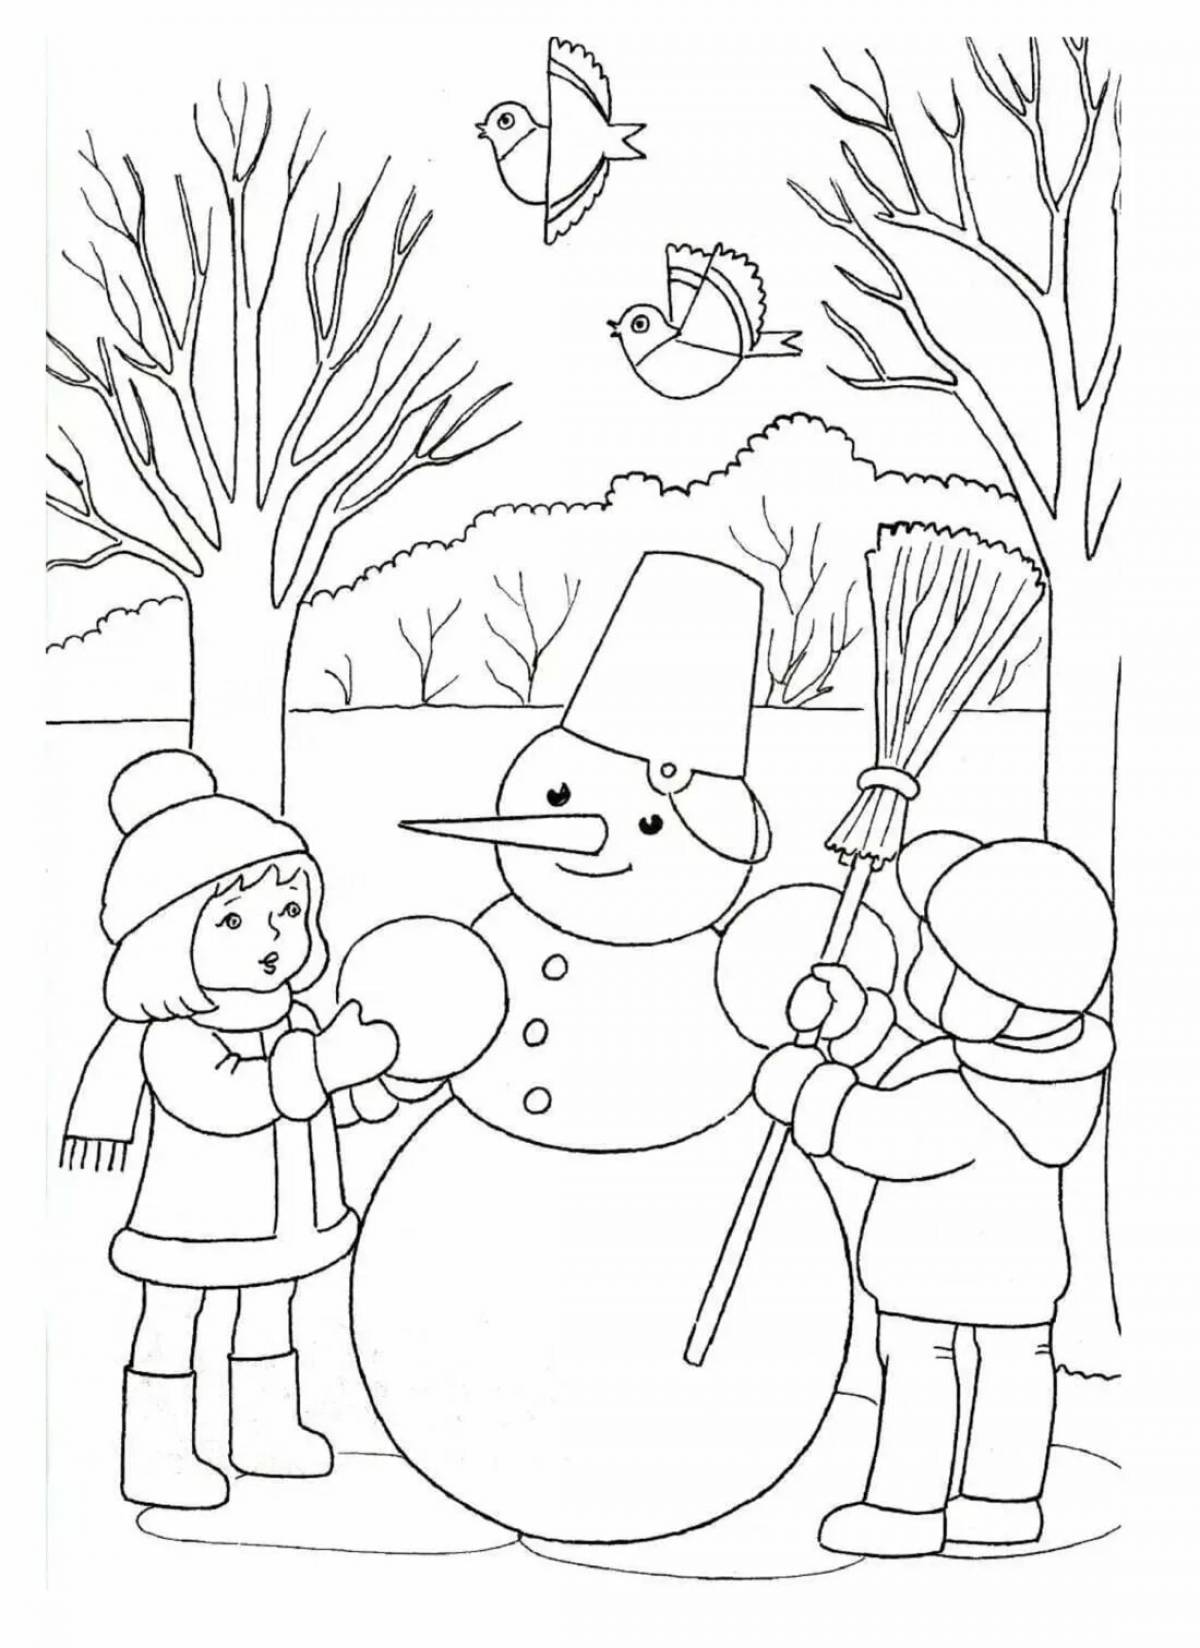 Festive winter coloring book for babies